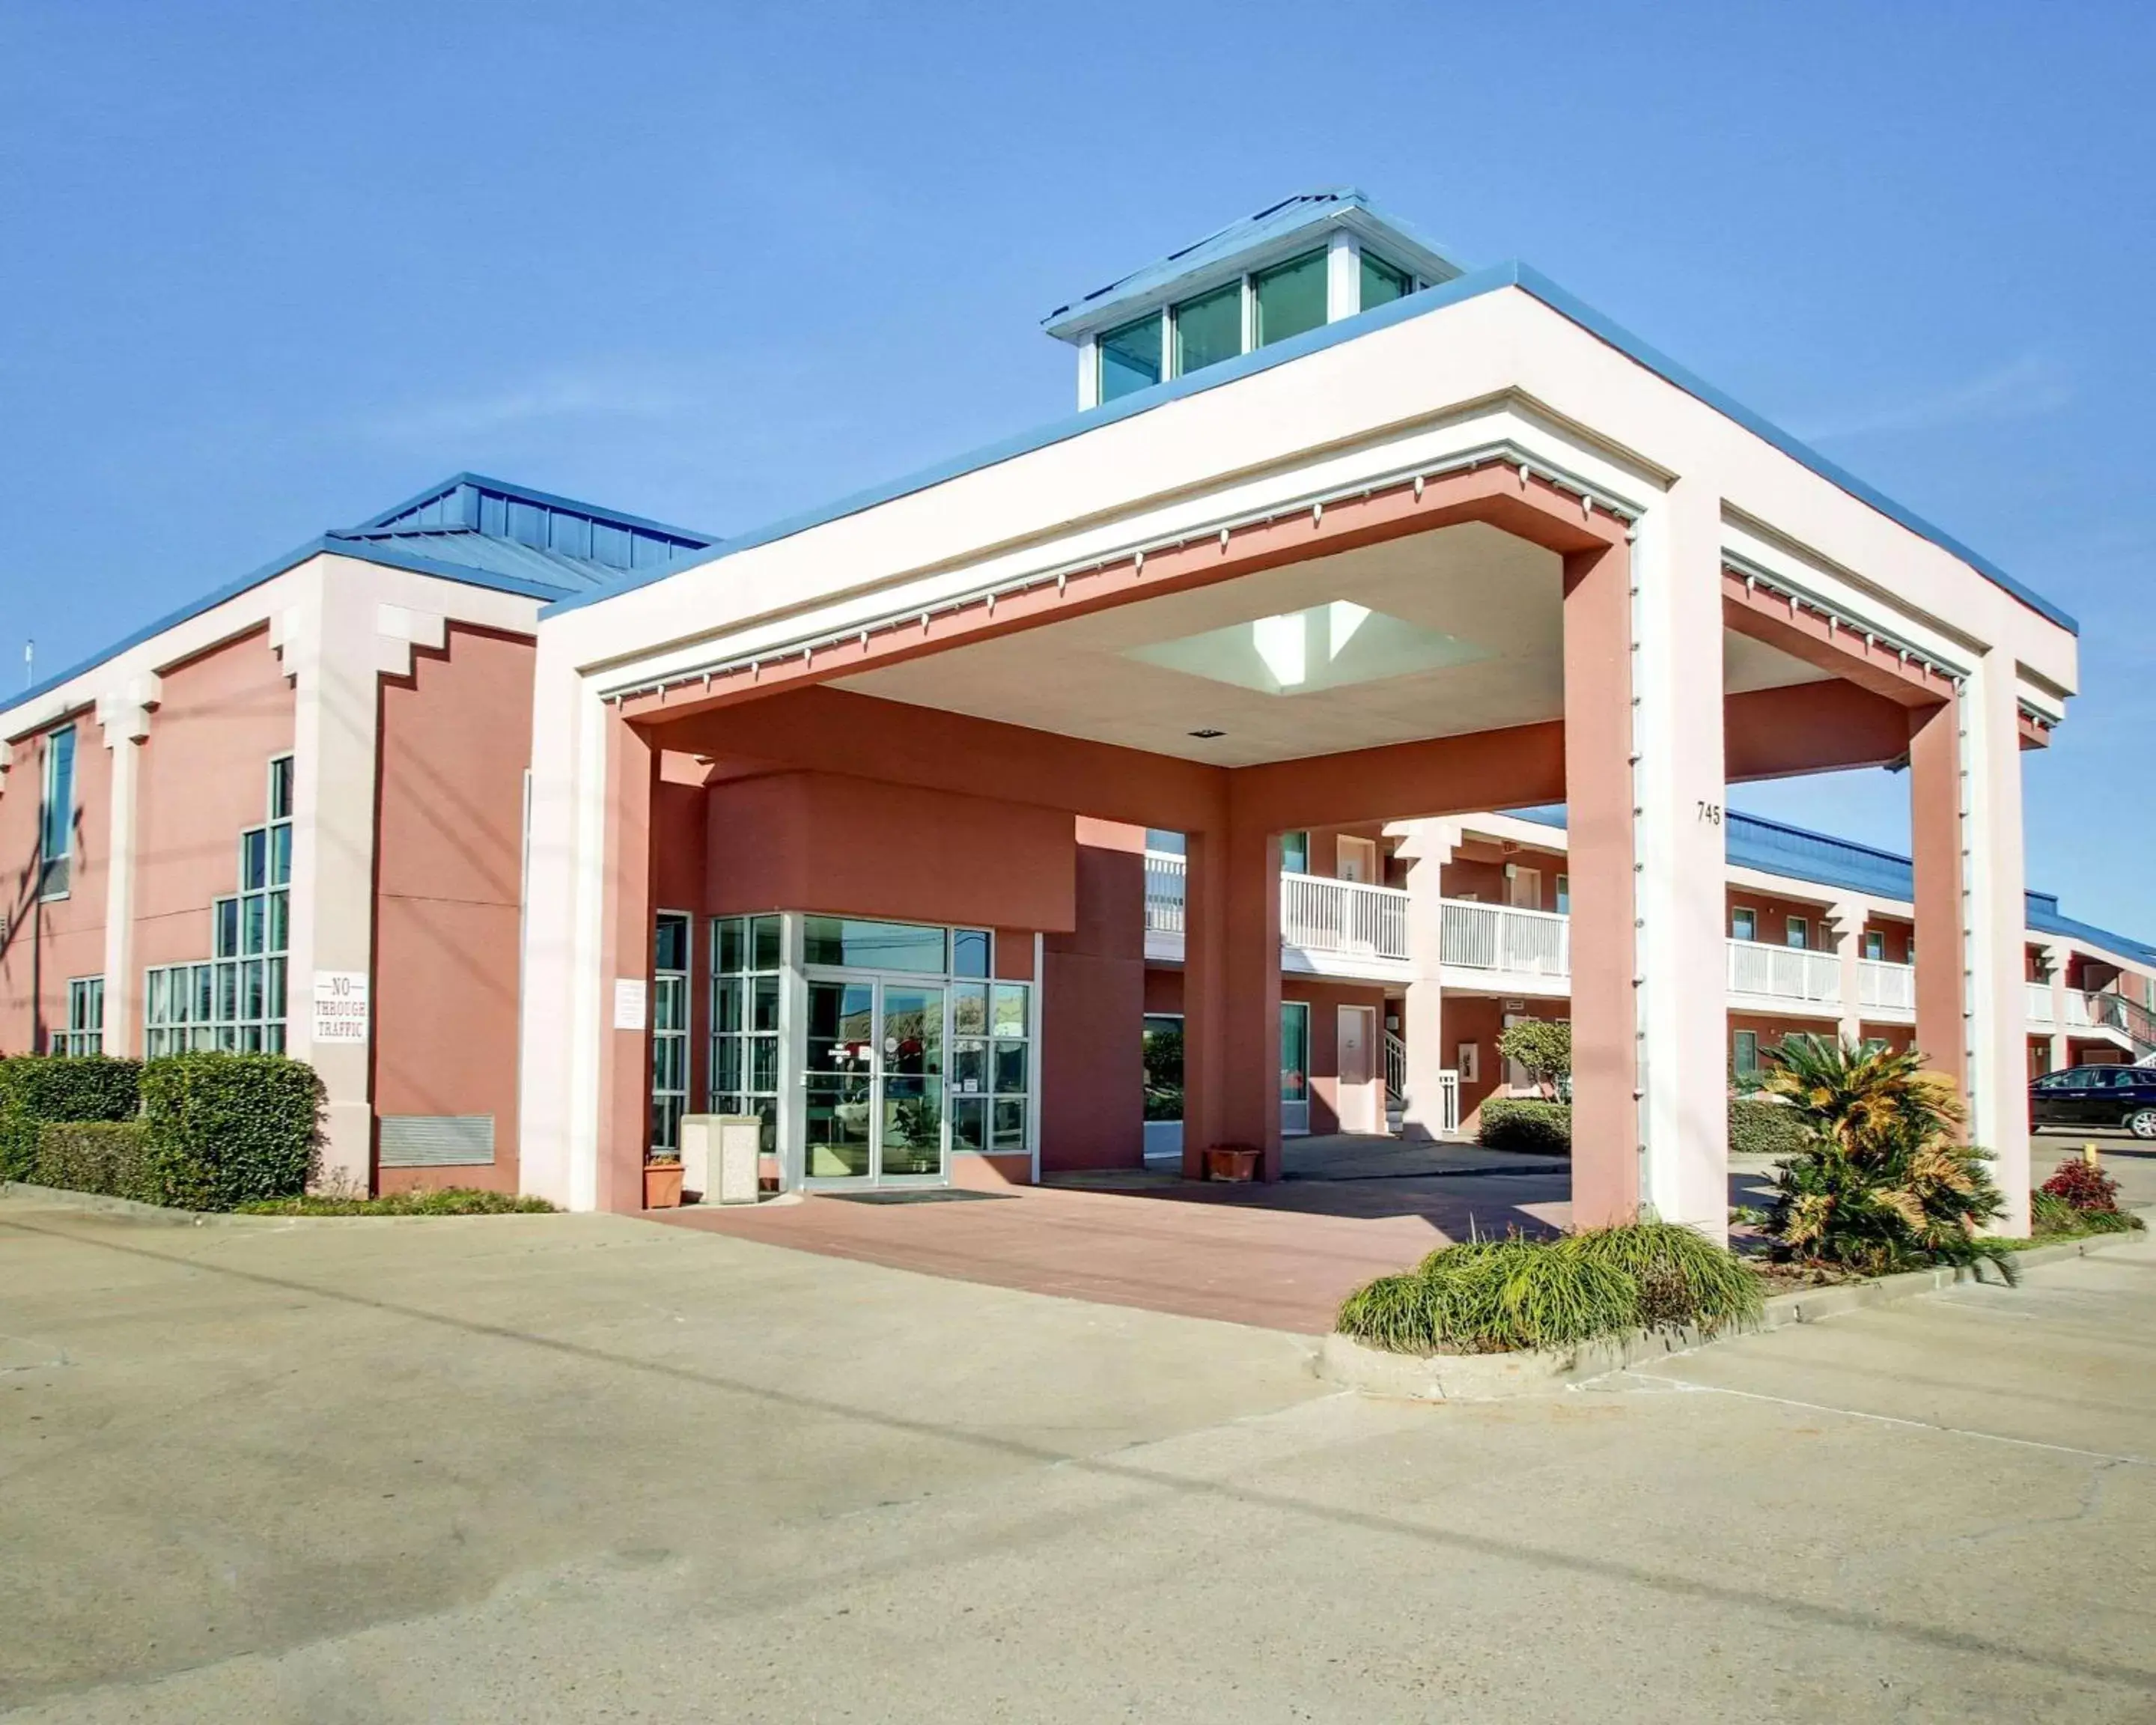 Property Building in Quality Inn Brookhaven